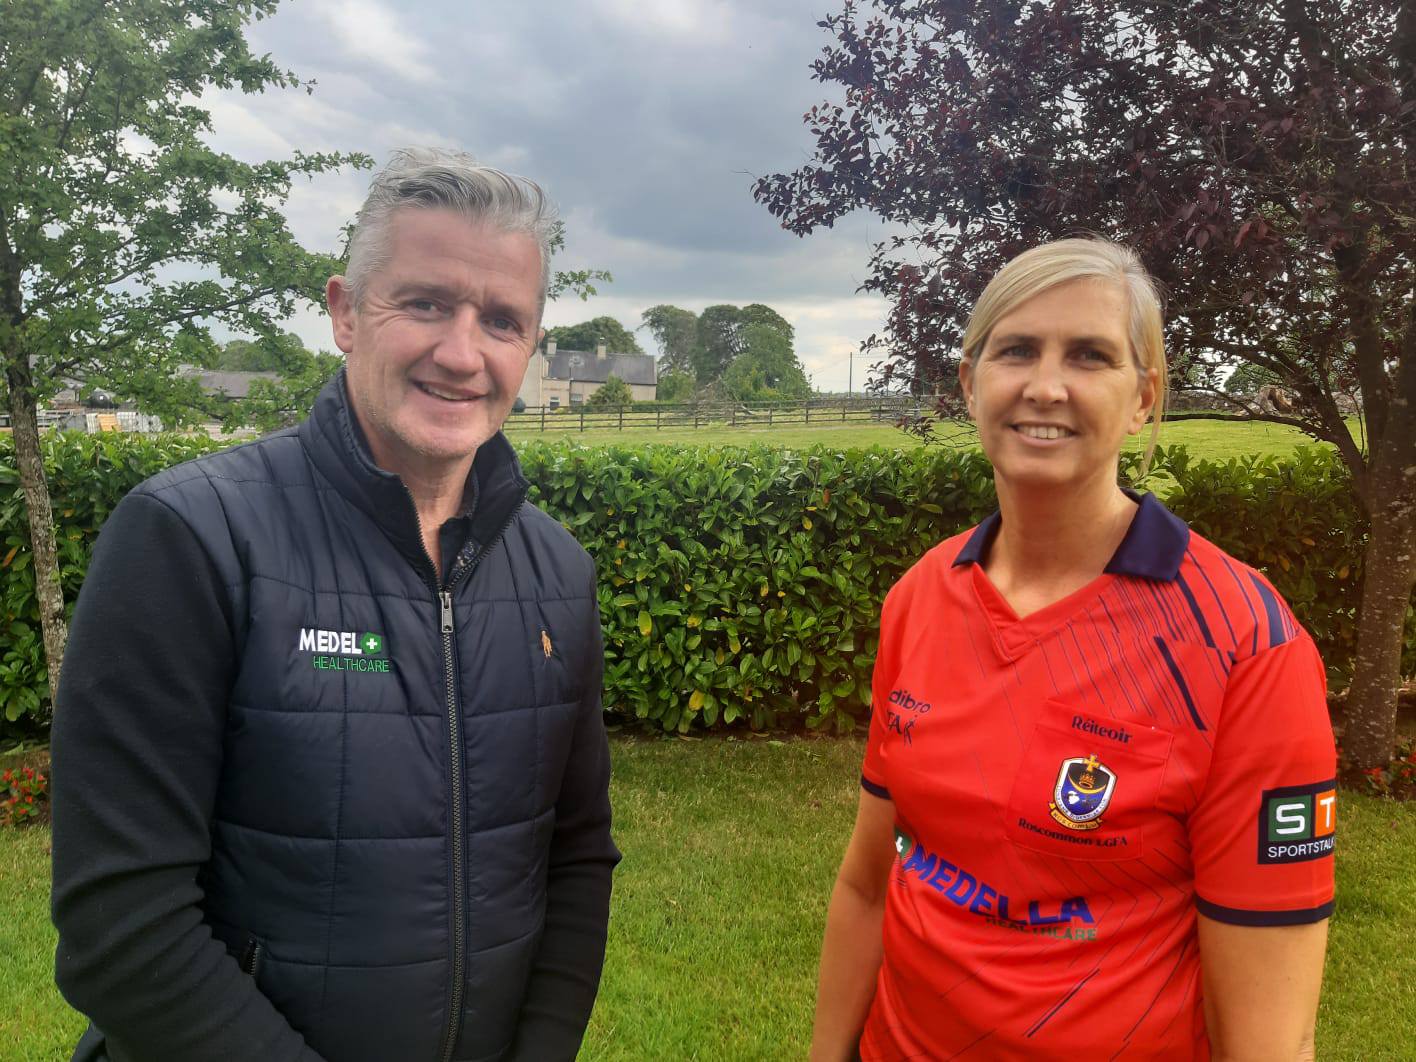 Medel Healthcare Test over 30 Roscommon Referees